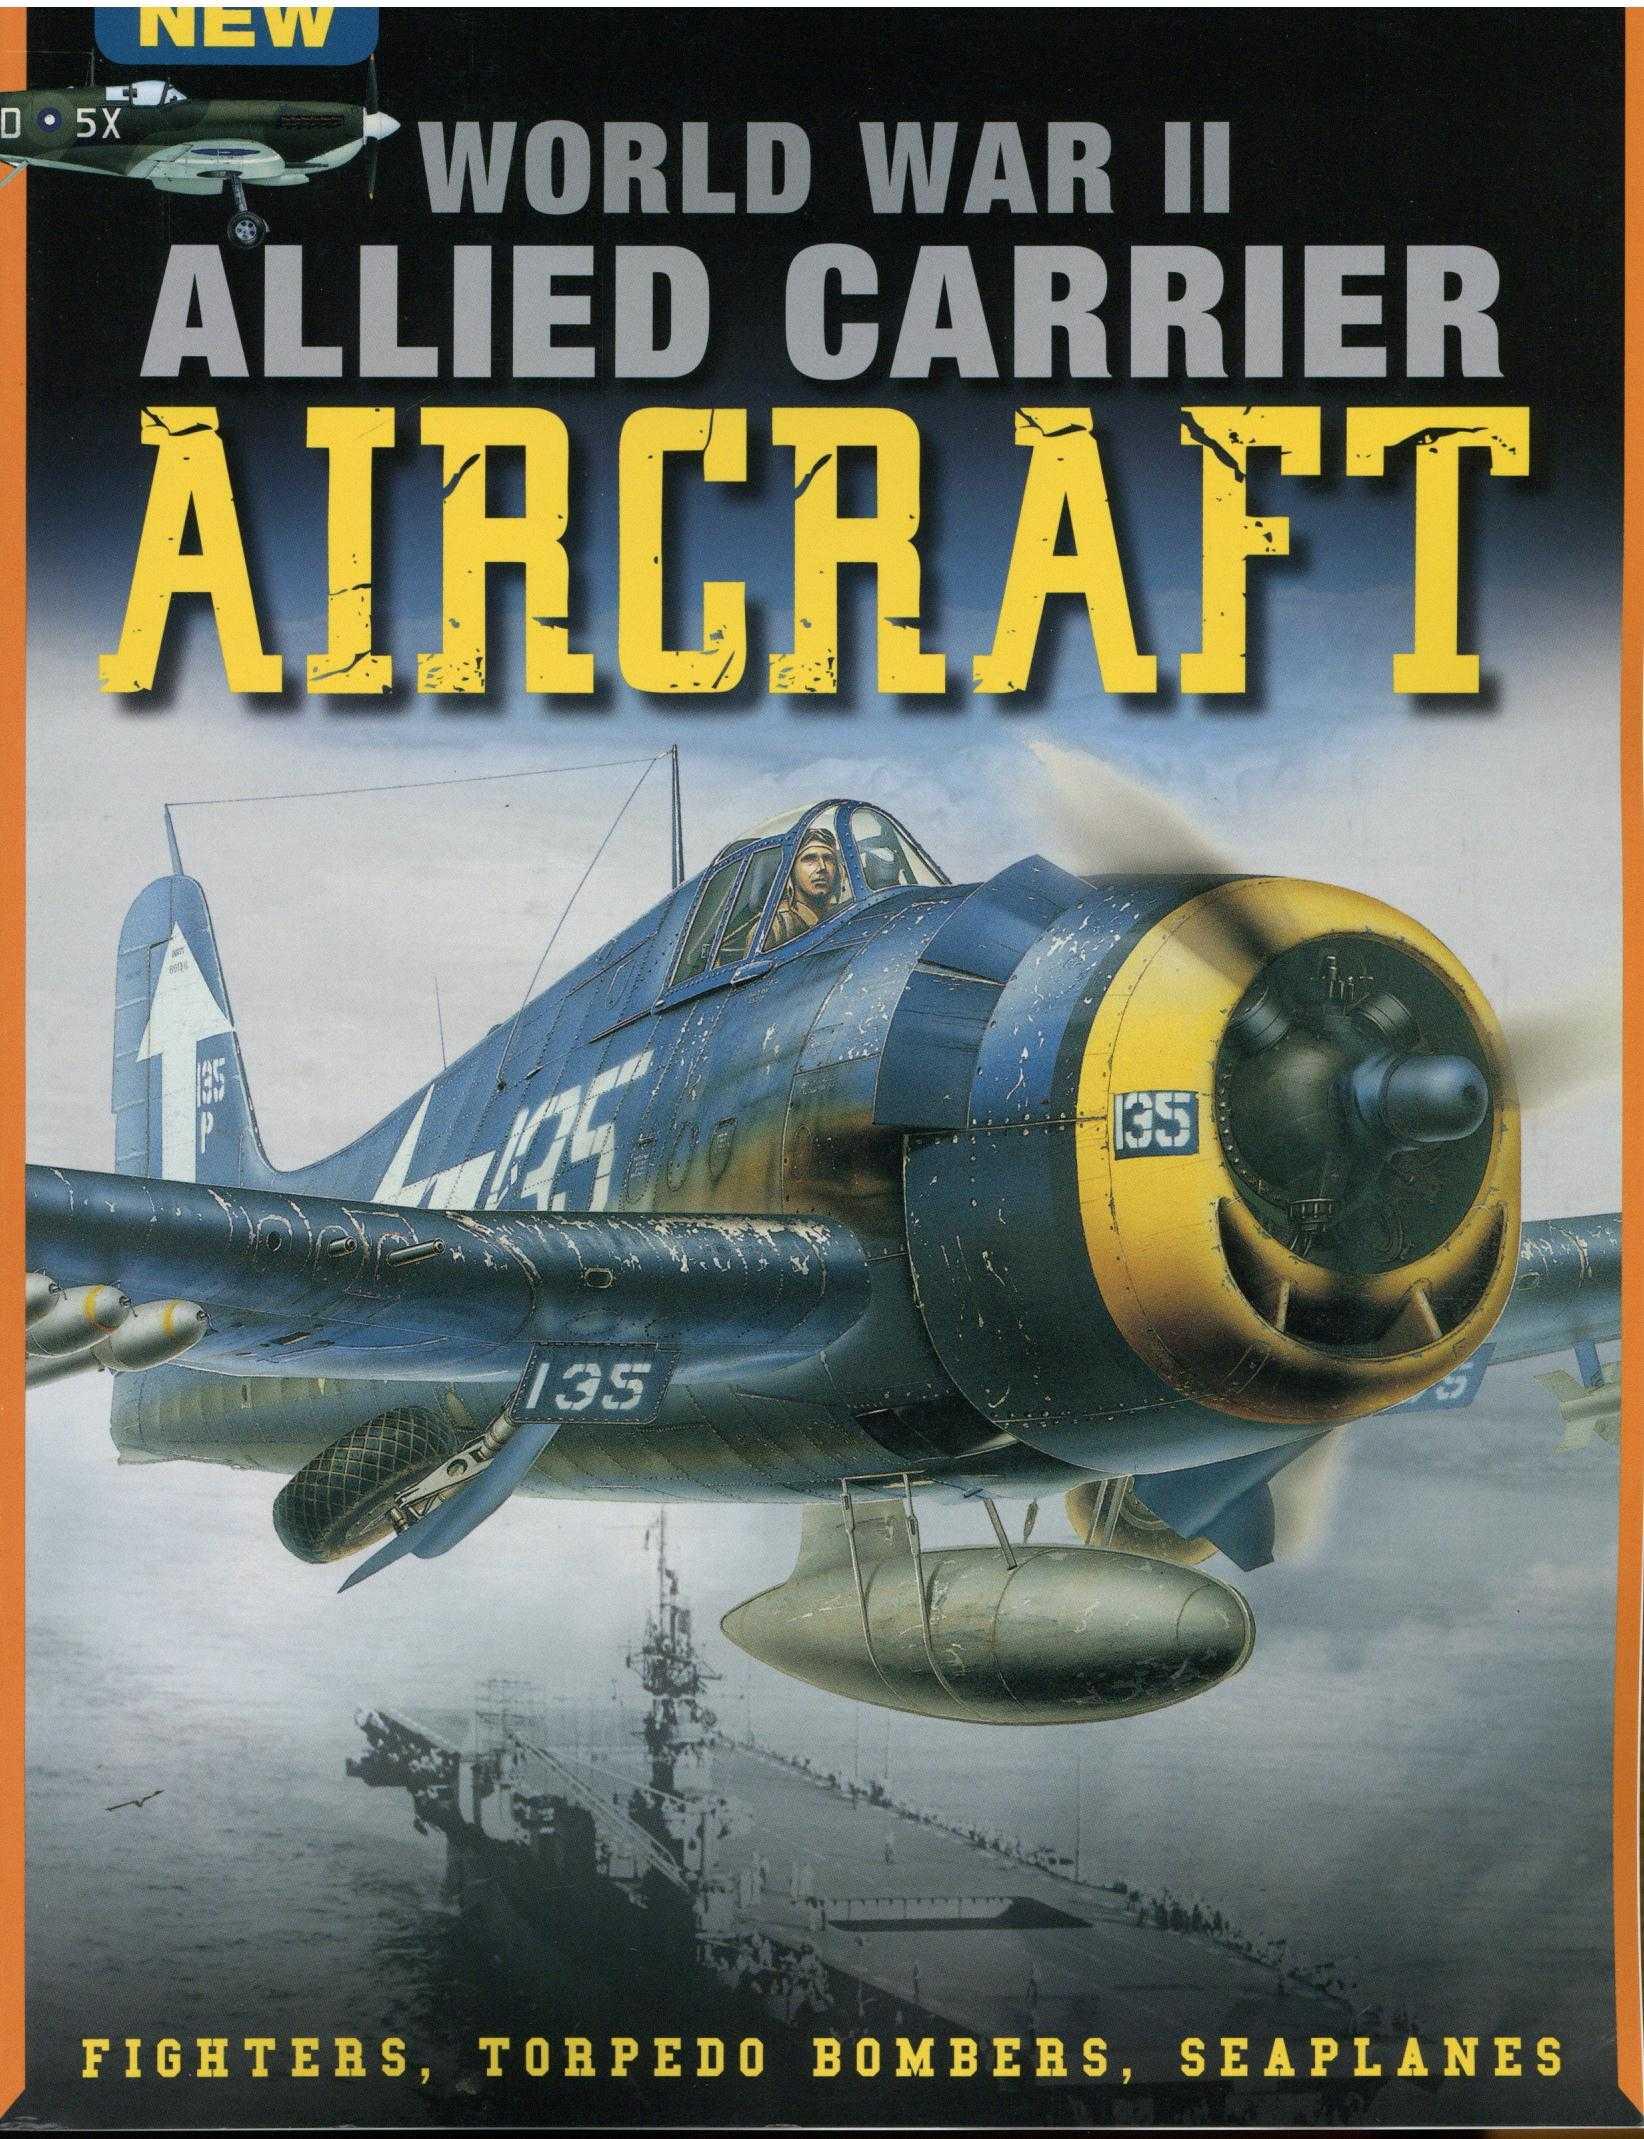 Allied Carrier Aircraft